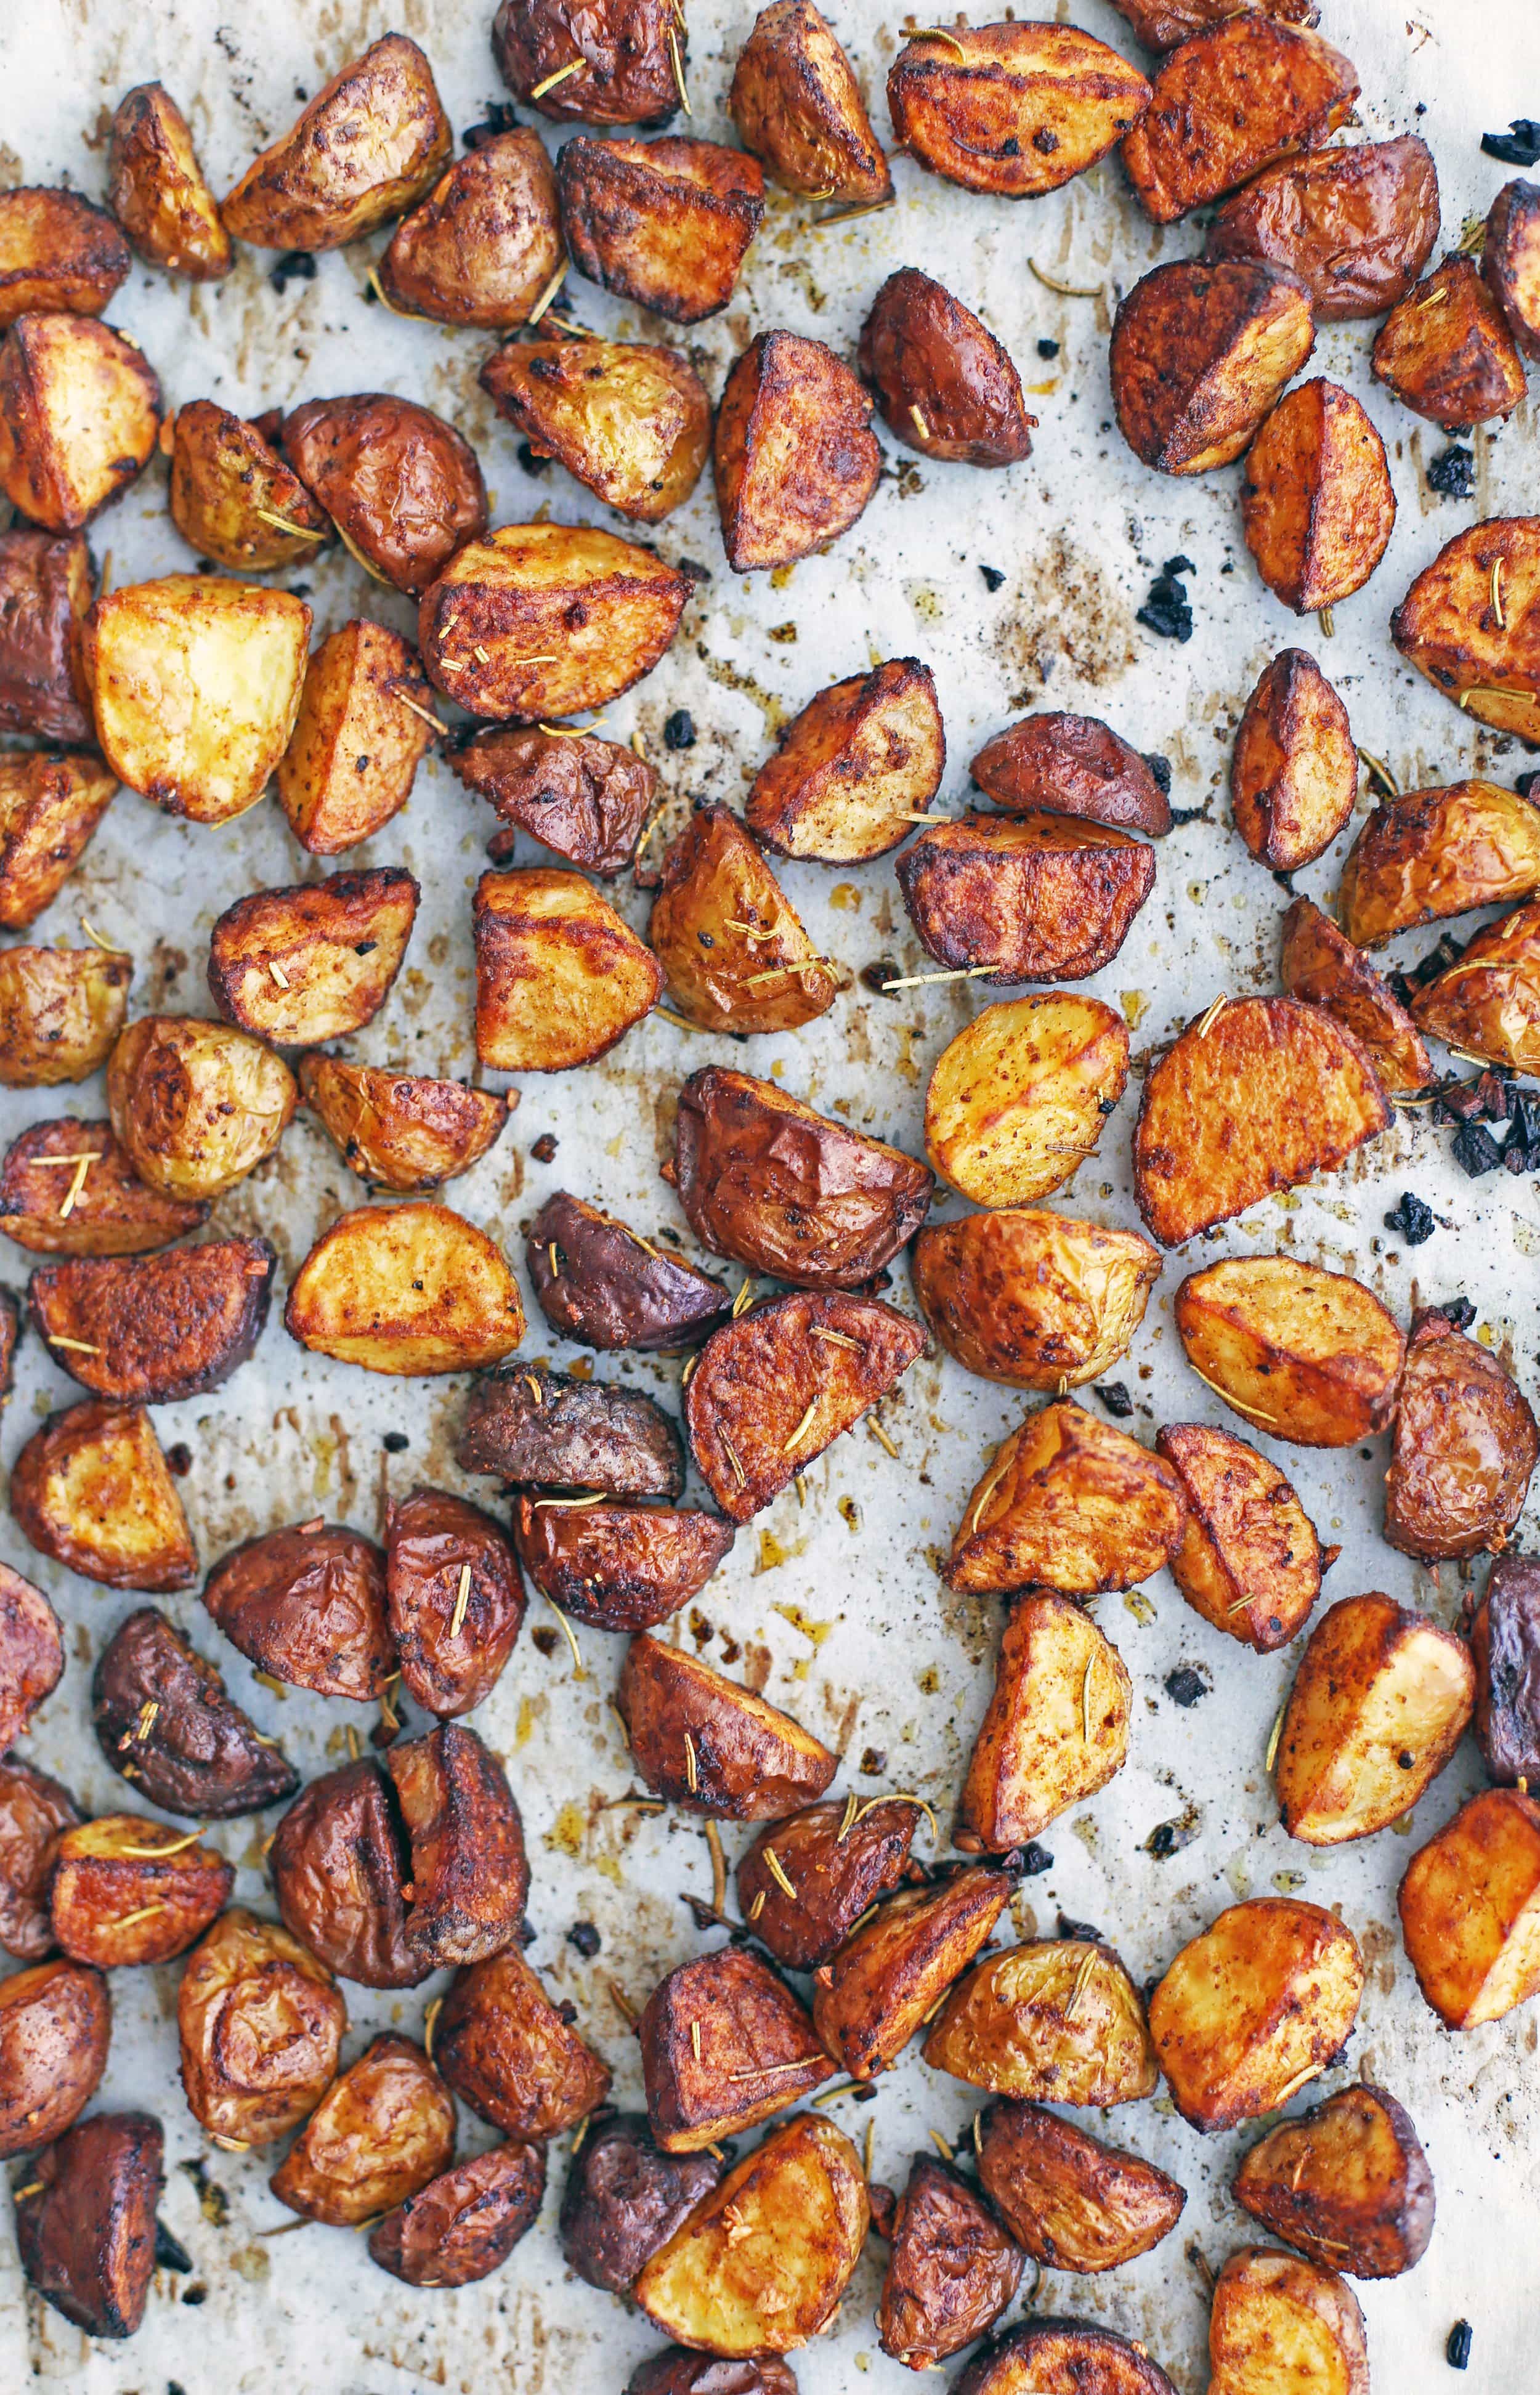 Chopped roasted spiced baby potatoes in a parchment paper lined baking sheet.